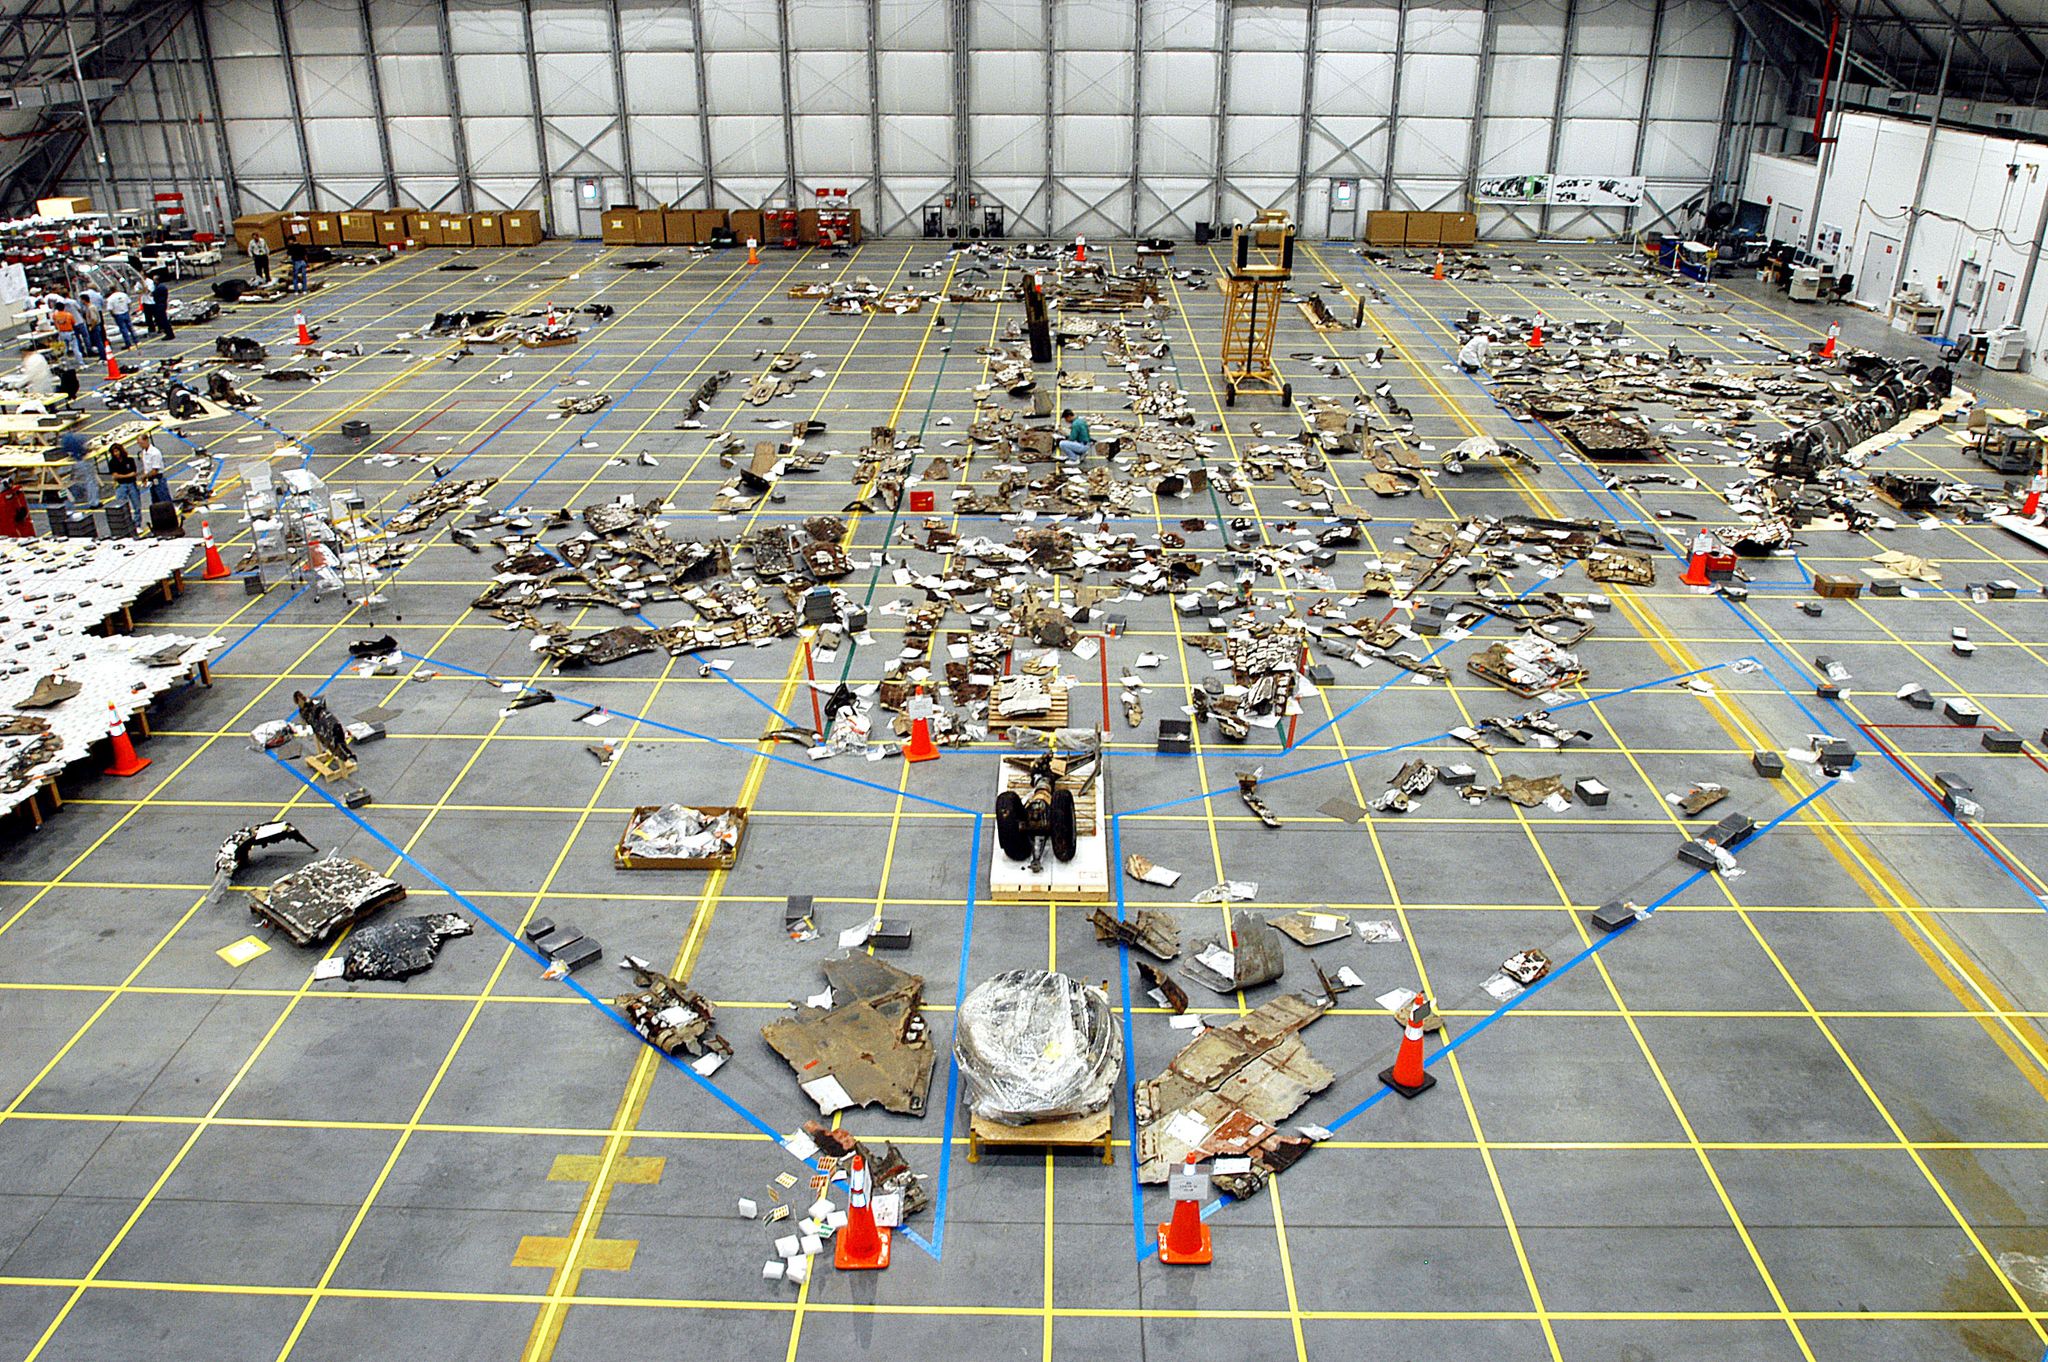 kennedy space center, fl   may 15  file photo  in this nasa handout, columbia space shuttle debris lies floor of the rlv hangar may 15, 2003 at kennedy space center, florida the columbia accident investigation board investigators say that a culture of low funding, strict scheduling and an eroded safety program at nasa doomed the flight of the space shuttle  photo by nasagetty images